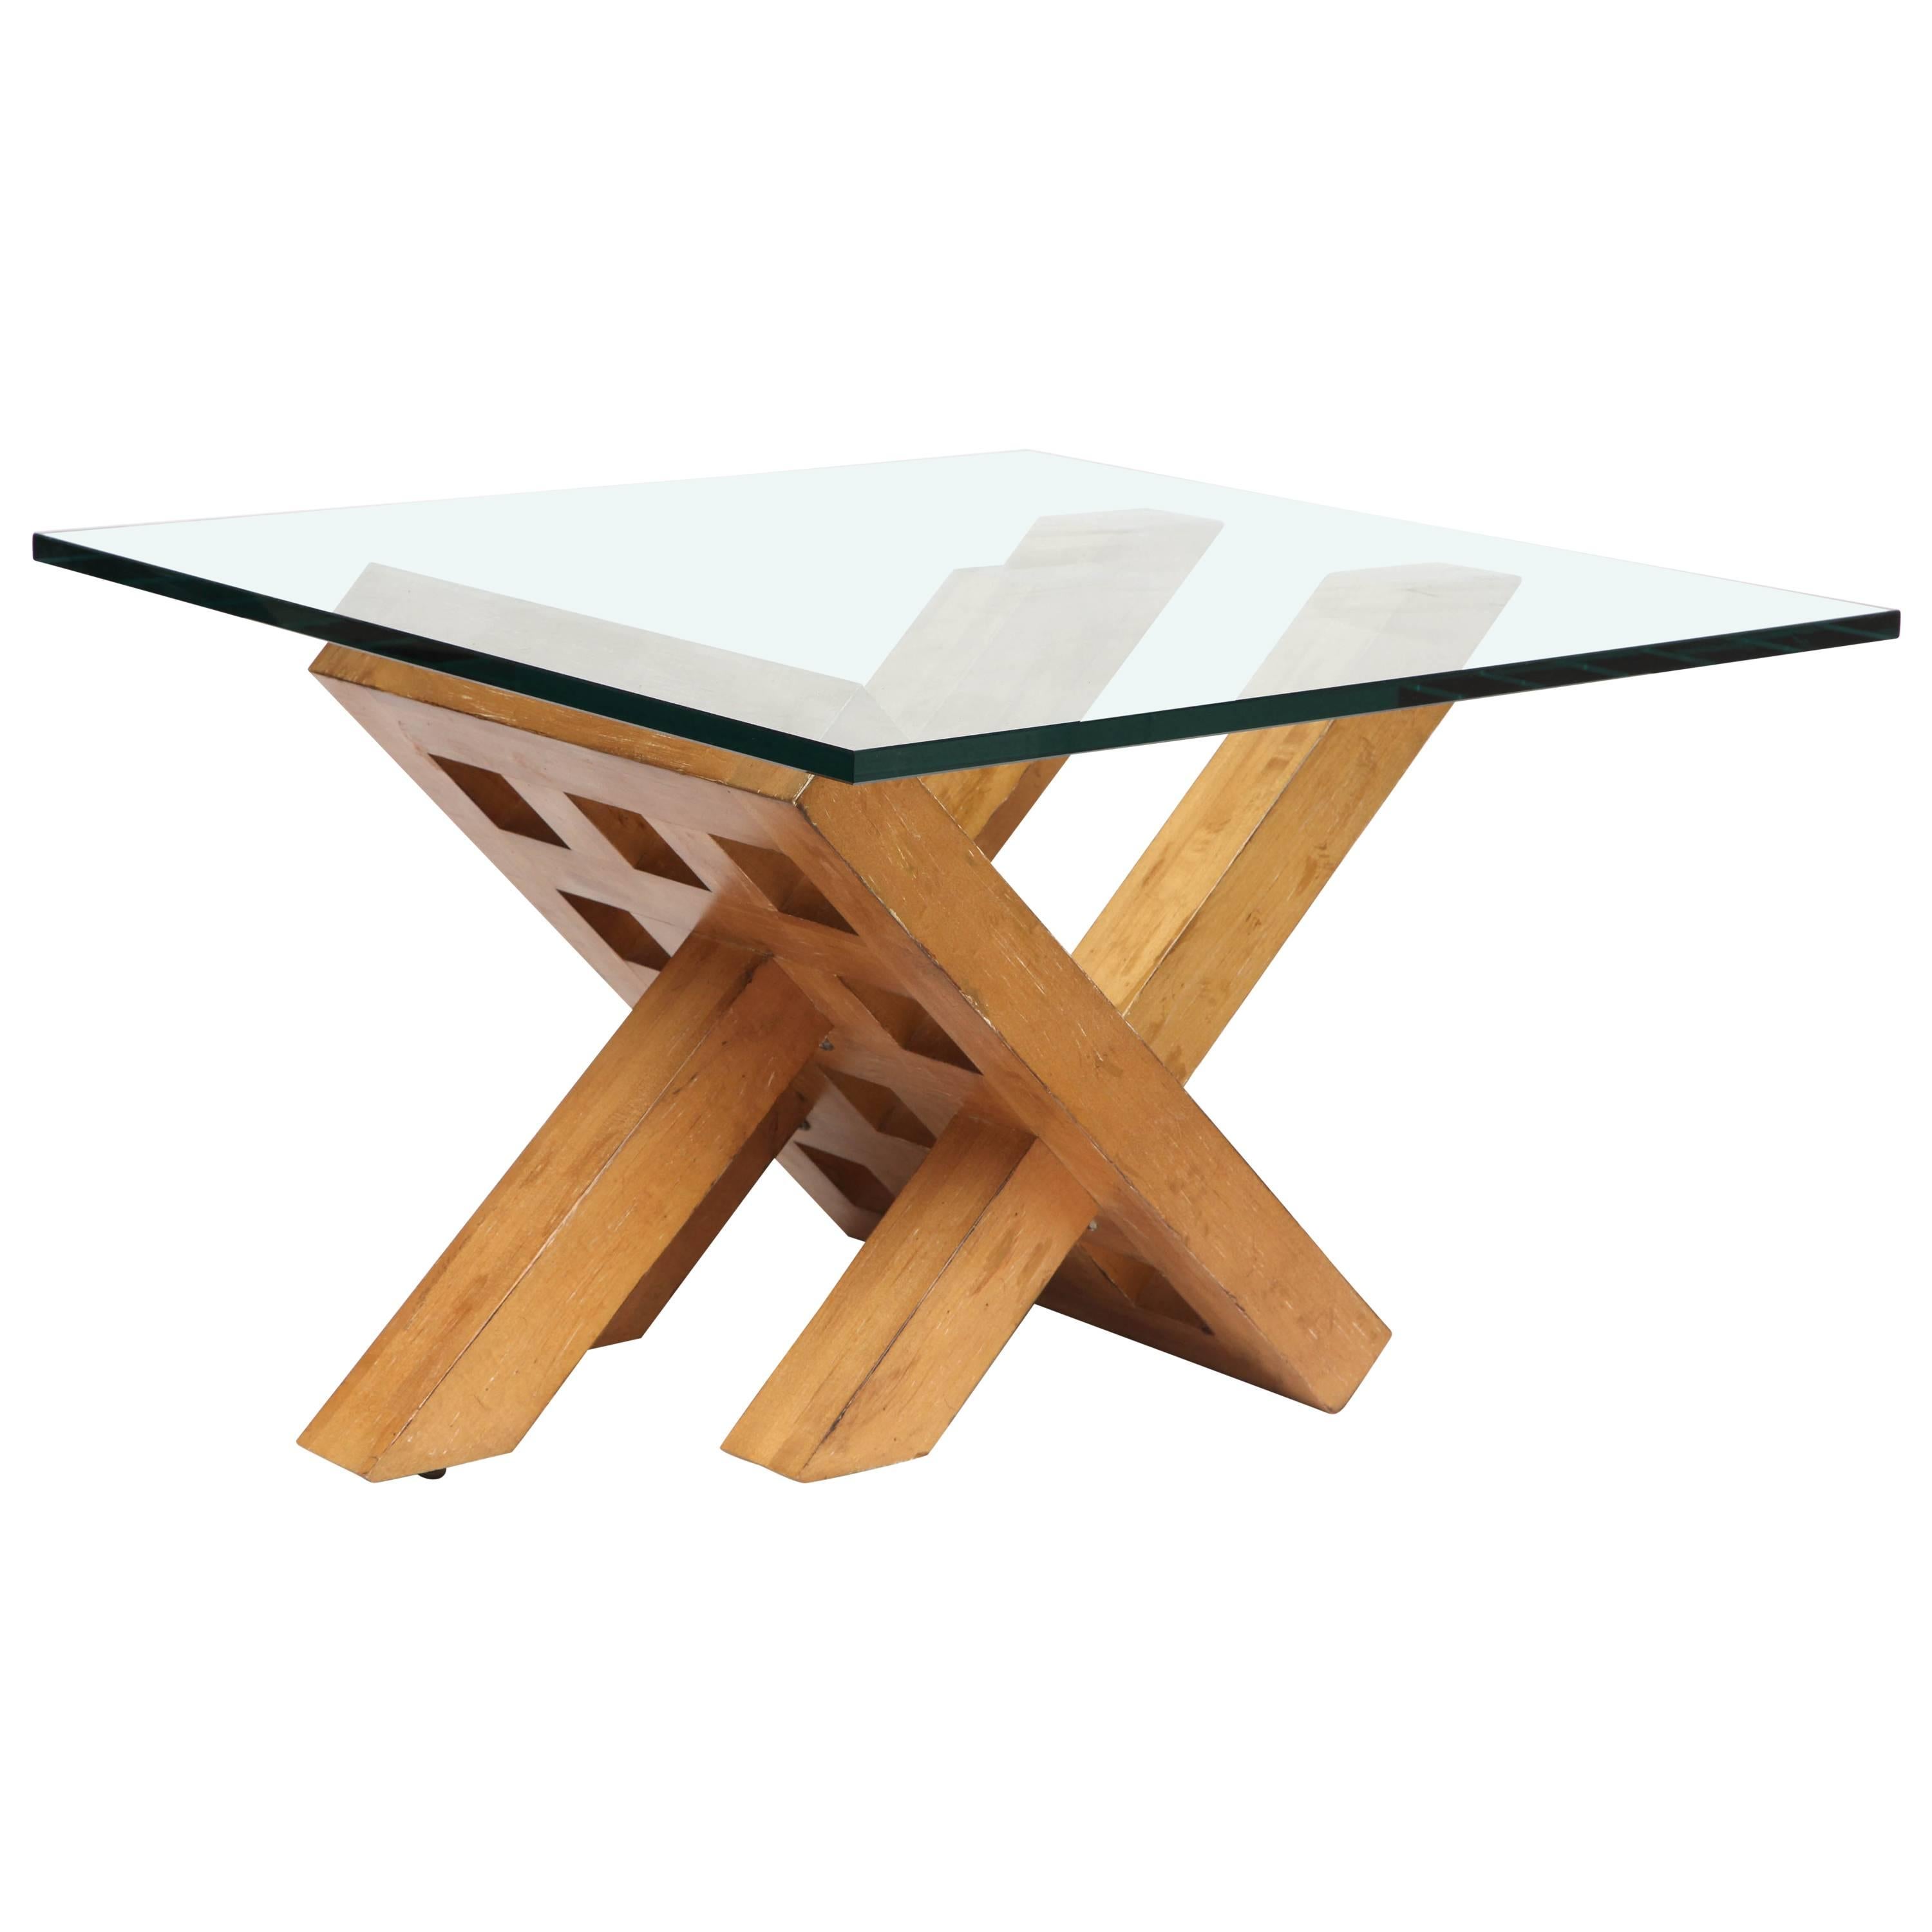 1940s Art Modern Architectural Wood and Glass Table